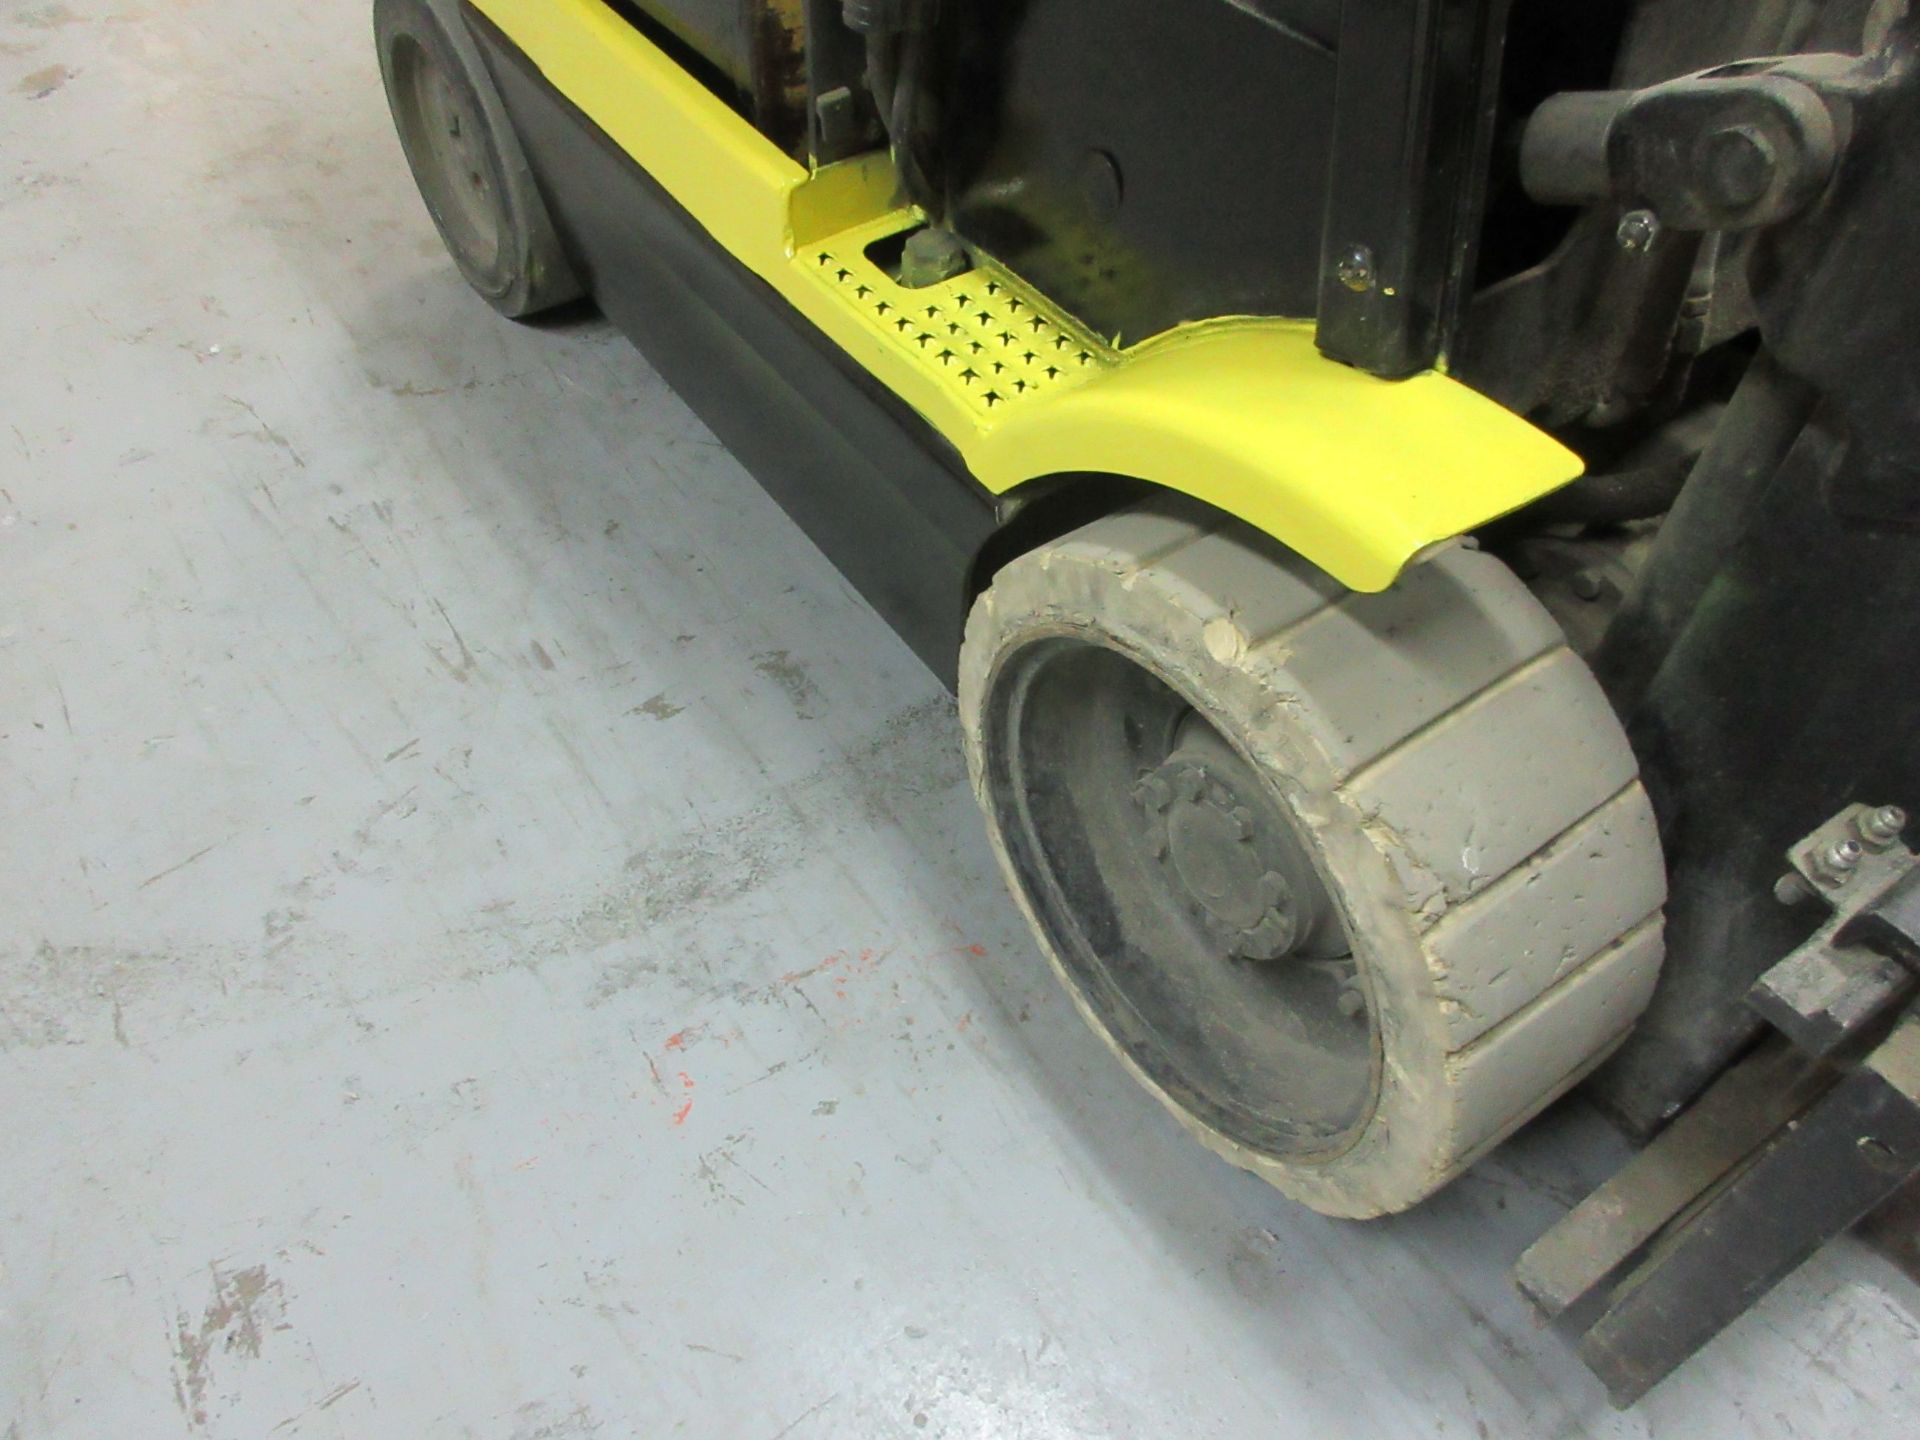 HYSTER Electric forklift Mod: E60XM-33, 2 sections, side shift, 36 volts w/t Ferro Five EFR - Image 9 of 14